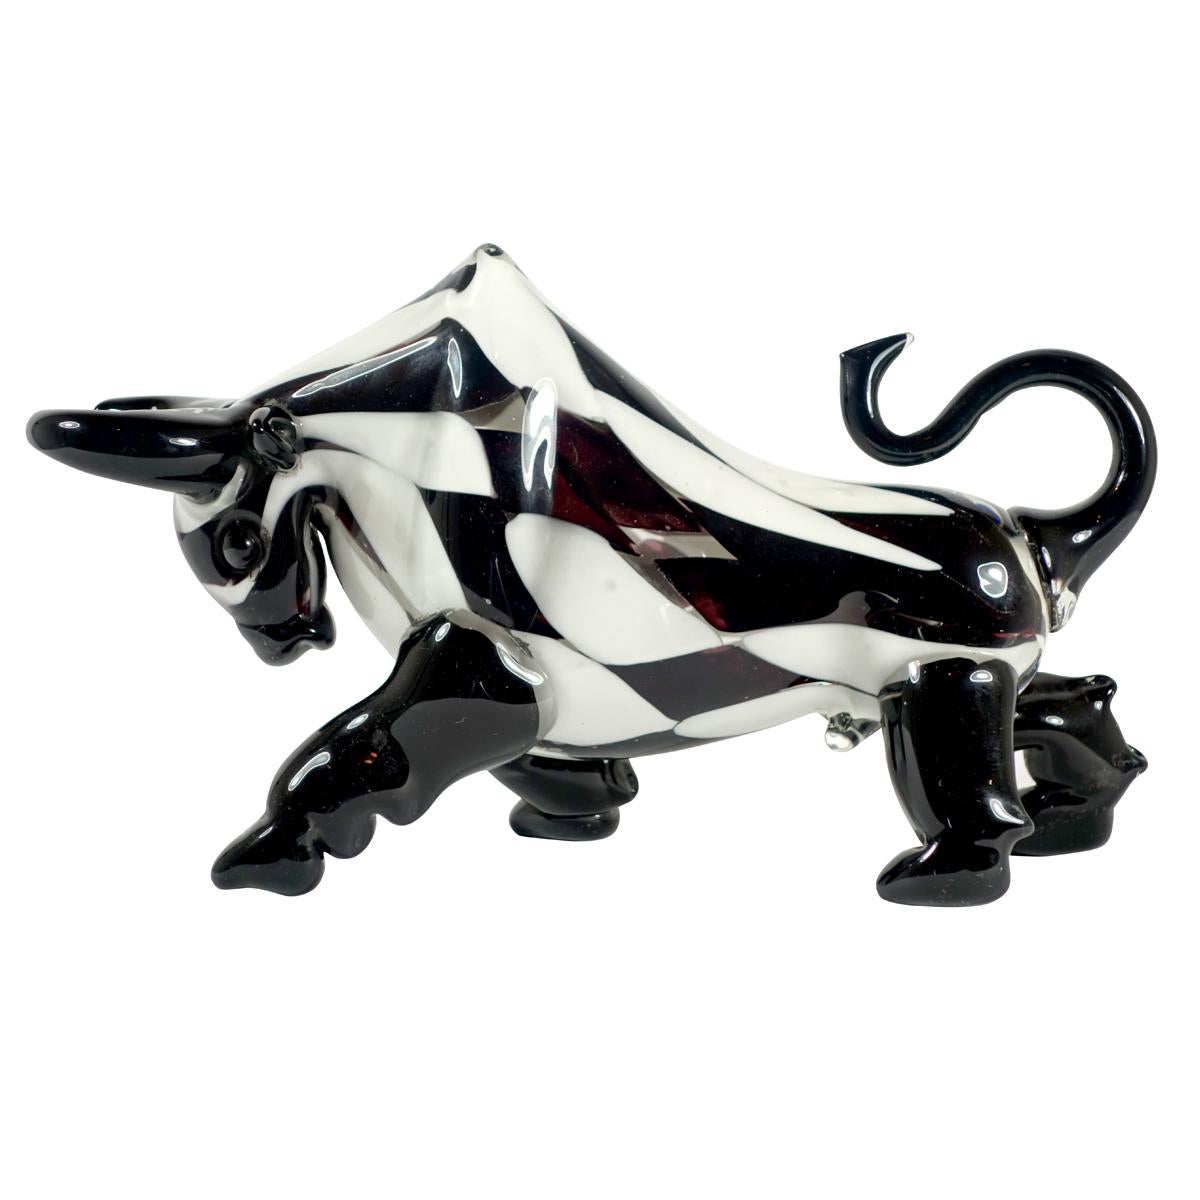 Eye-catching pair of bulls in fighting position. They are made of Murano glass and carry a checkered black and white pattern.
This pair of bulls has different dimensions: the small one is 5.6 inches high (and 10.1 long) whereas the big one is 7.2